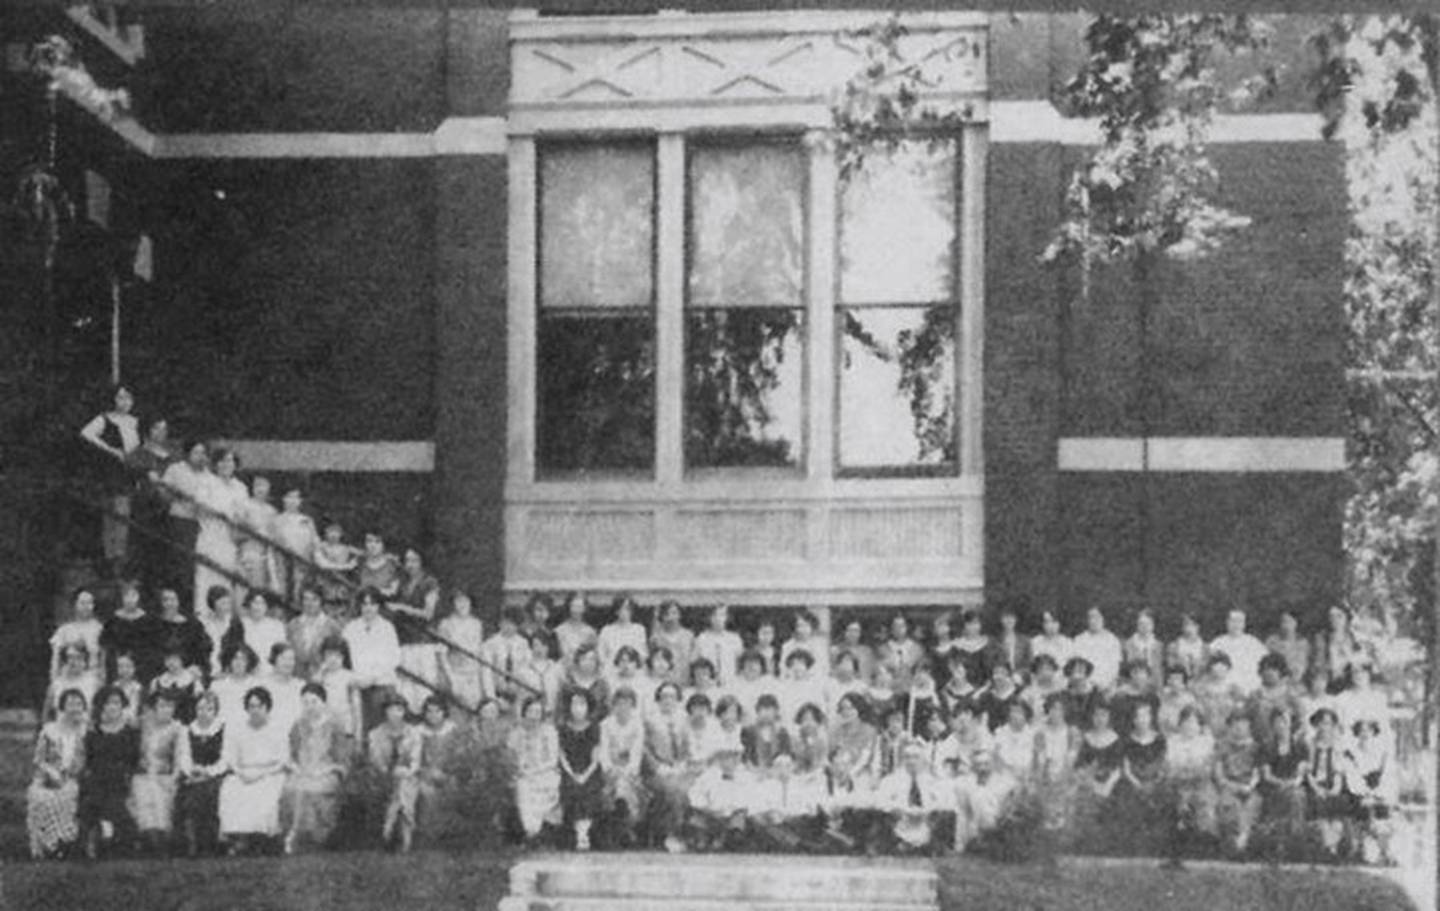 Photographed in 1926 are the employees of the Radium Dial Studio, which was located in the former Ottawa High School building on Columbus Street.